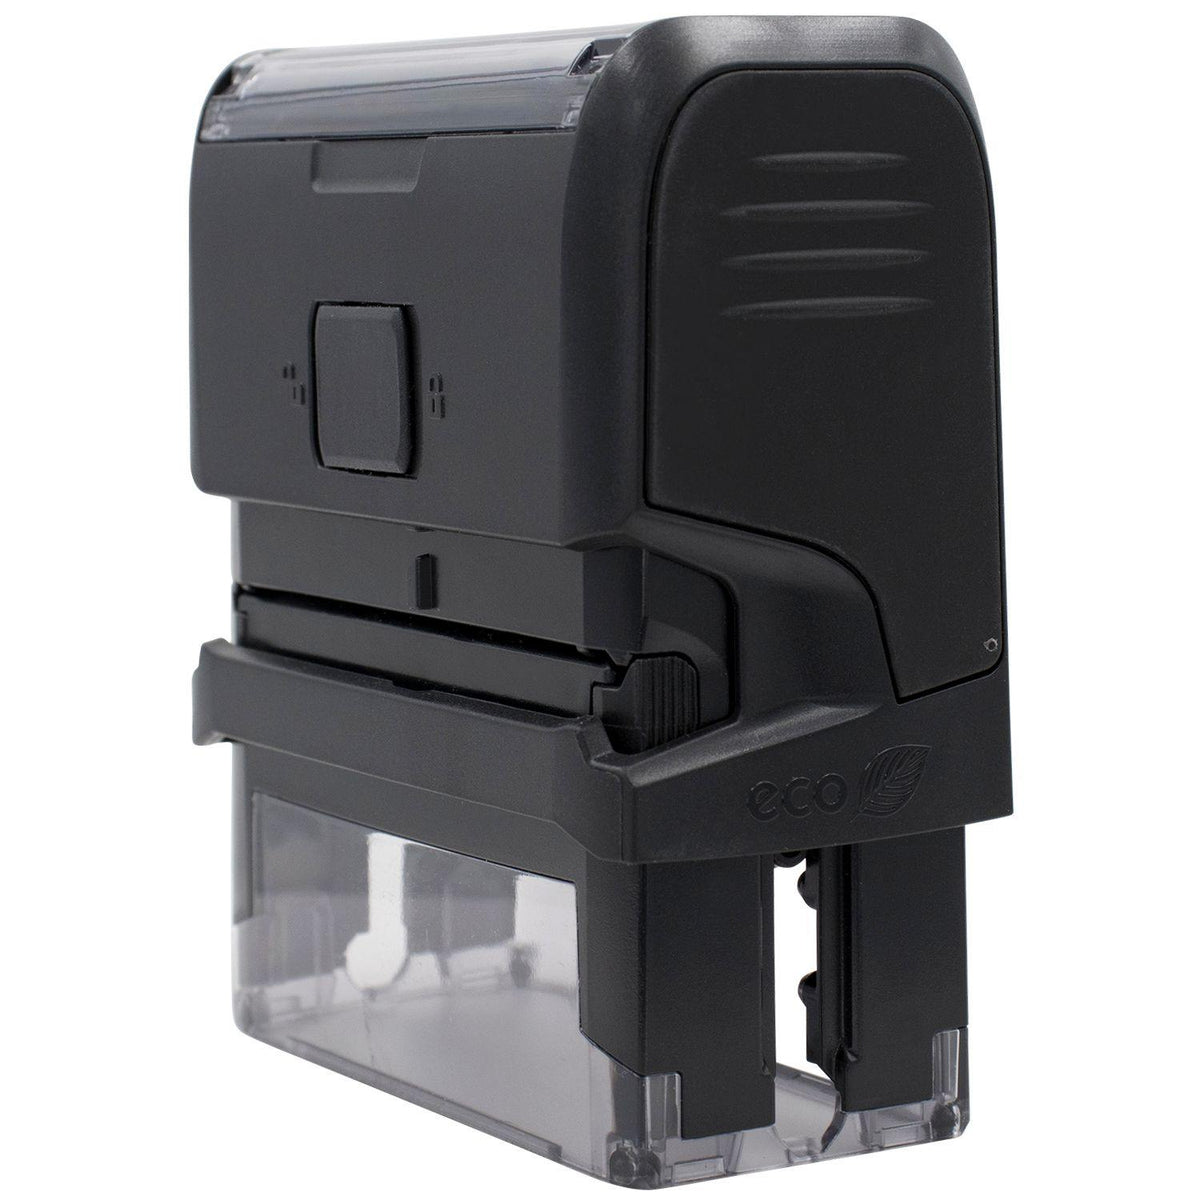 Self Inking Super Kid Stamp - Engineer Seal Stamps - Brand_Trodat, Impression Size_Small, Stamp Type_Self-Inking Stamp, Type of Use_Teacher